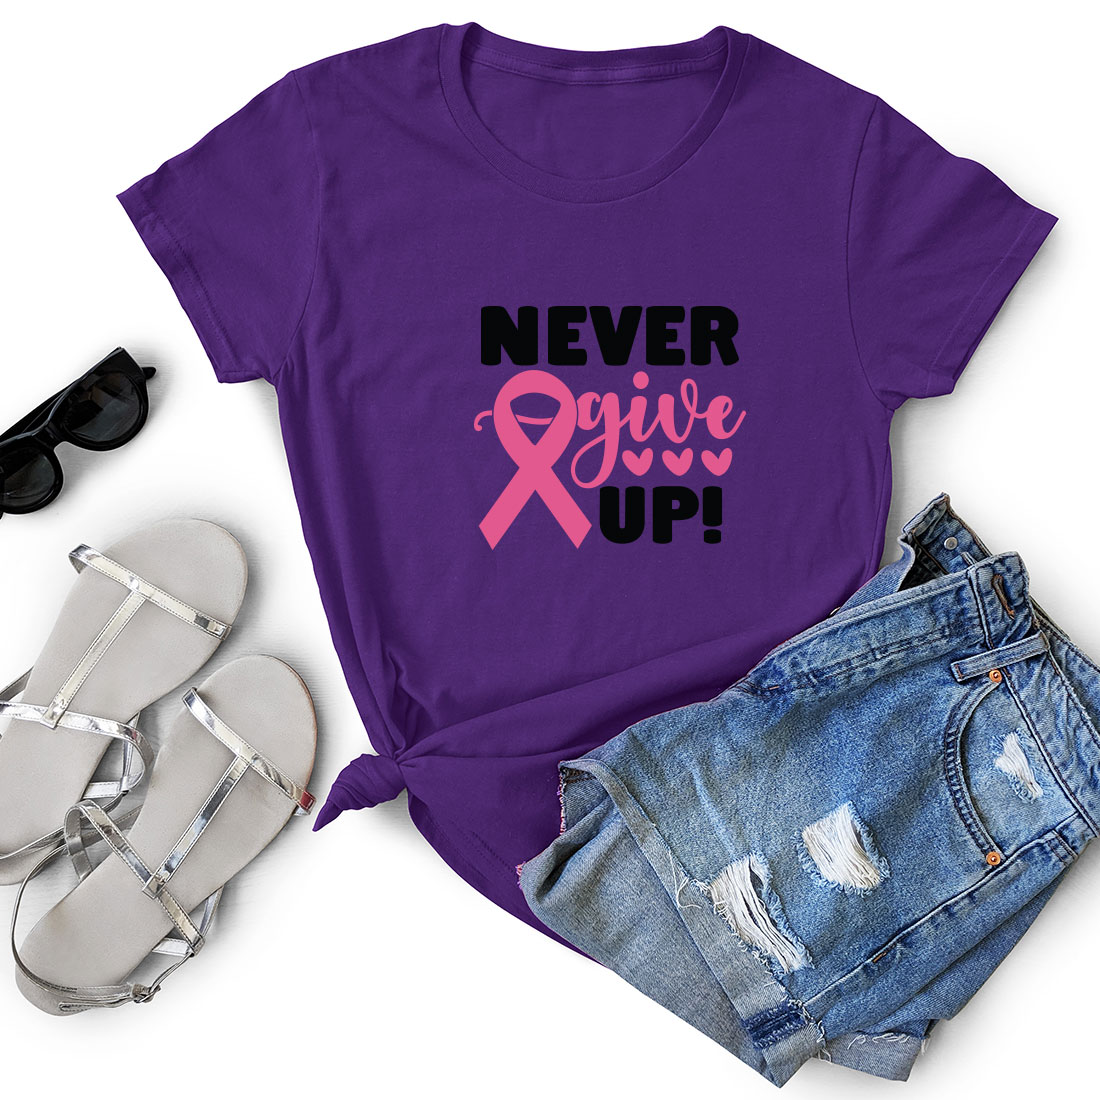 T - shirt that says never give up with a pink ribbon.